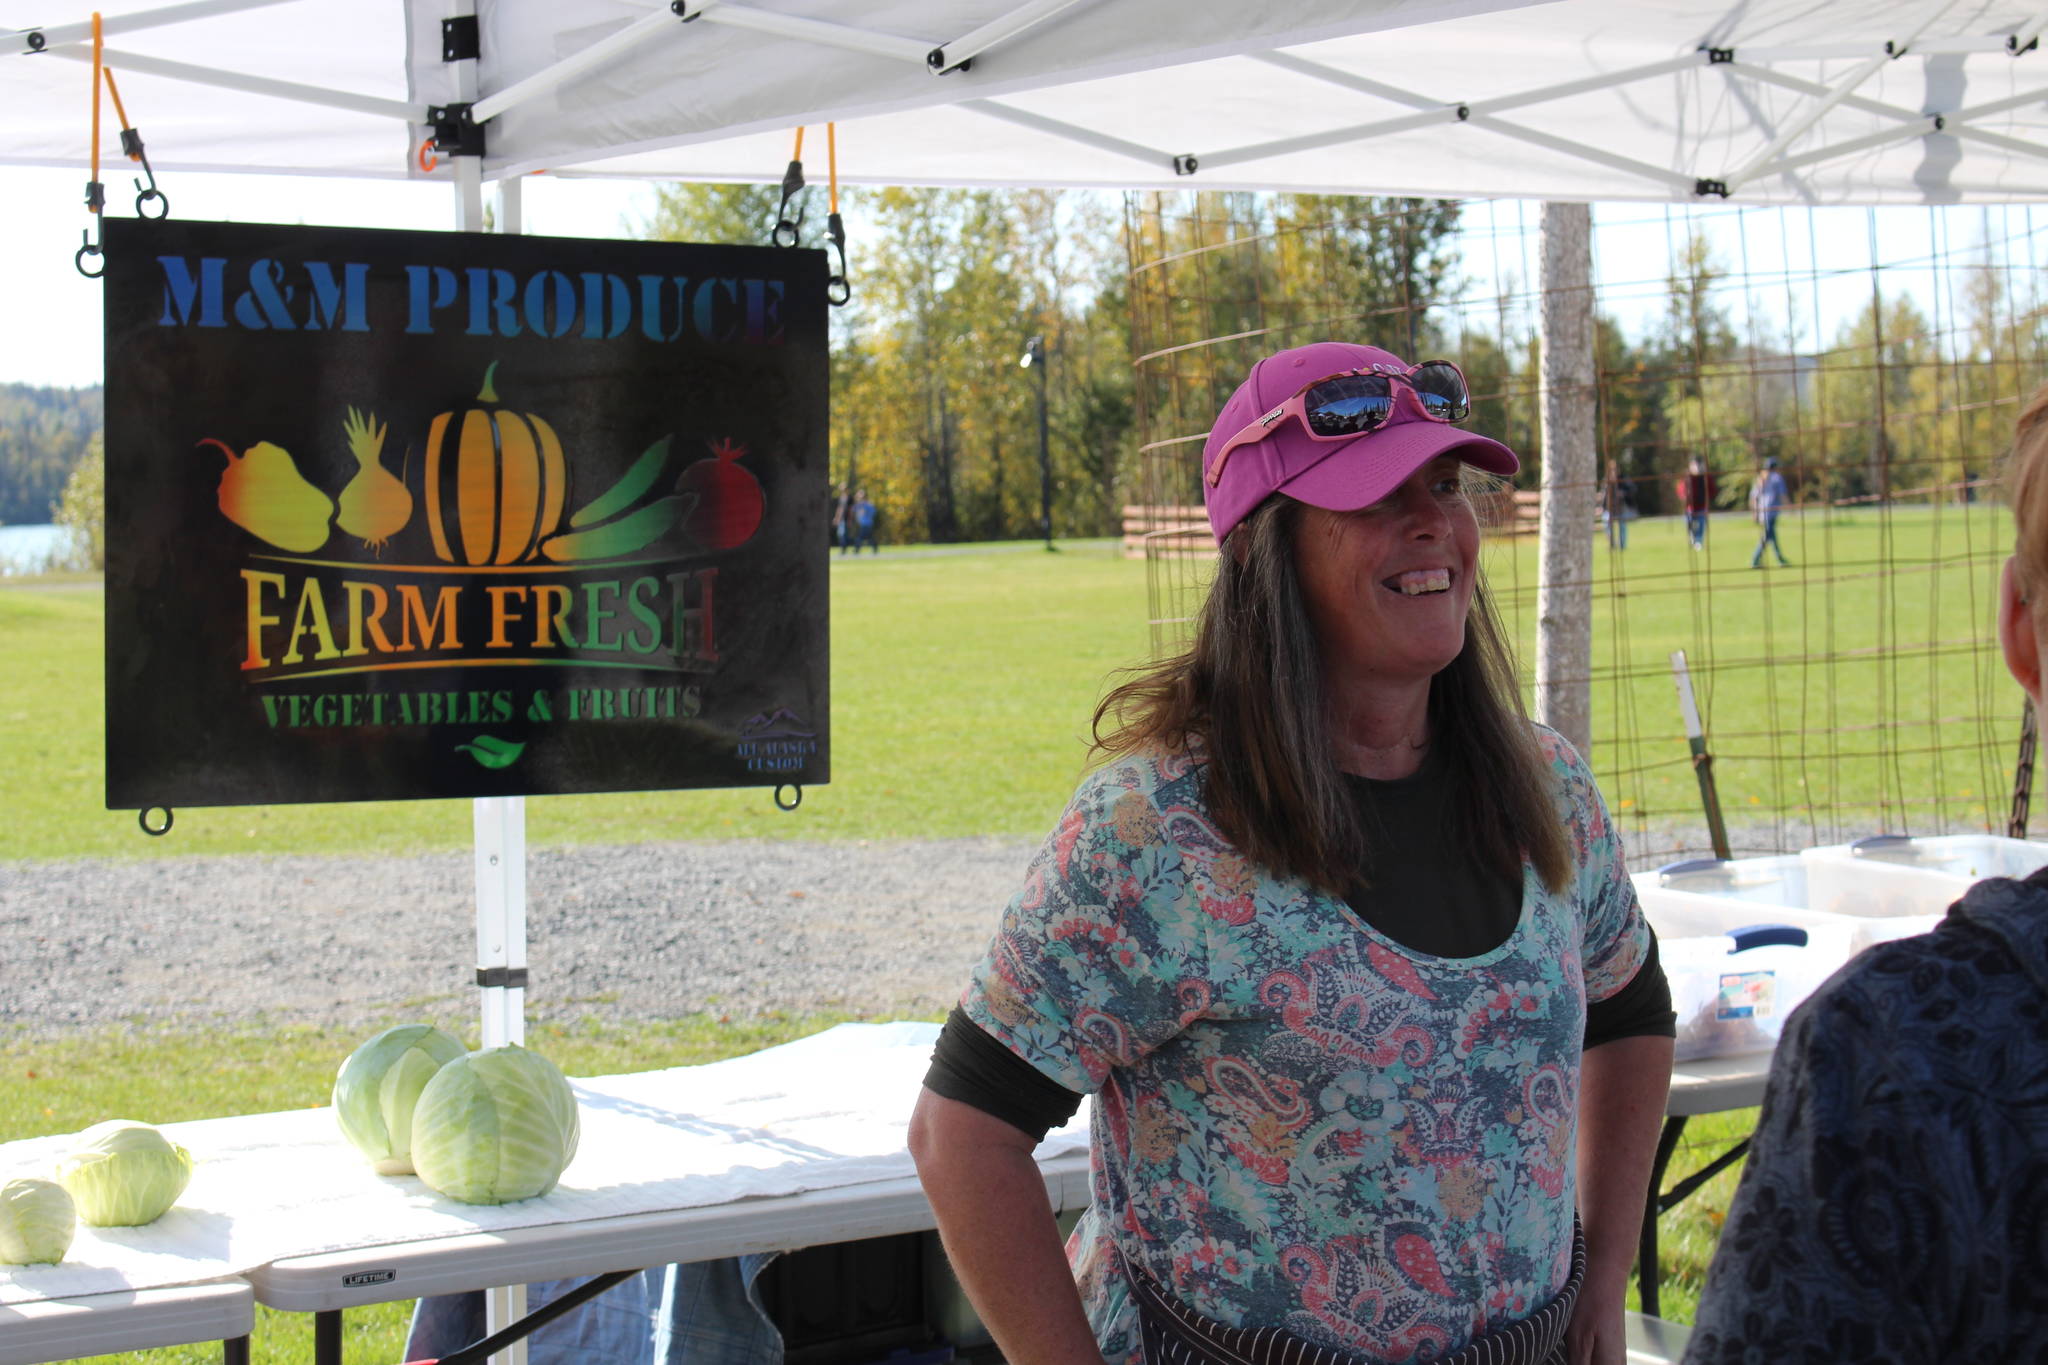 Mary Appelhanz of M&M Produce speaks to customers at the Harvest Moon Local Food Festival at Soldotna Creek Park on Sept. 14, 2019. (Photo by Brian Mazurek/Peninsula Clarion)